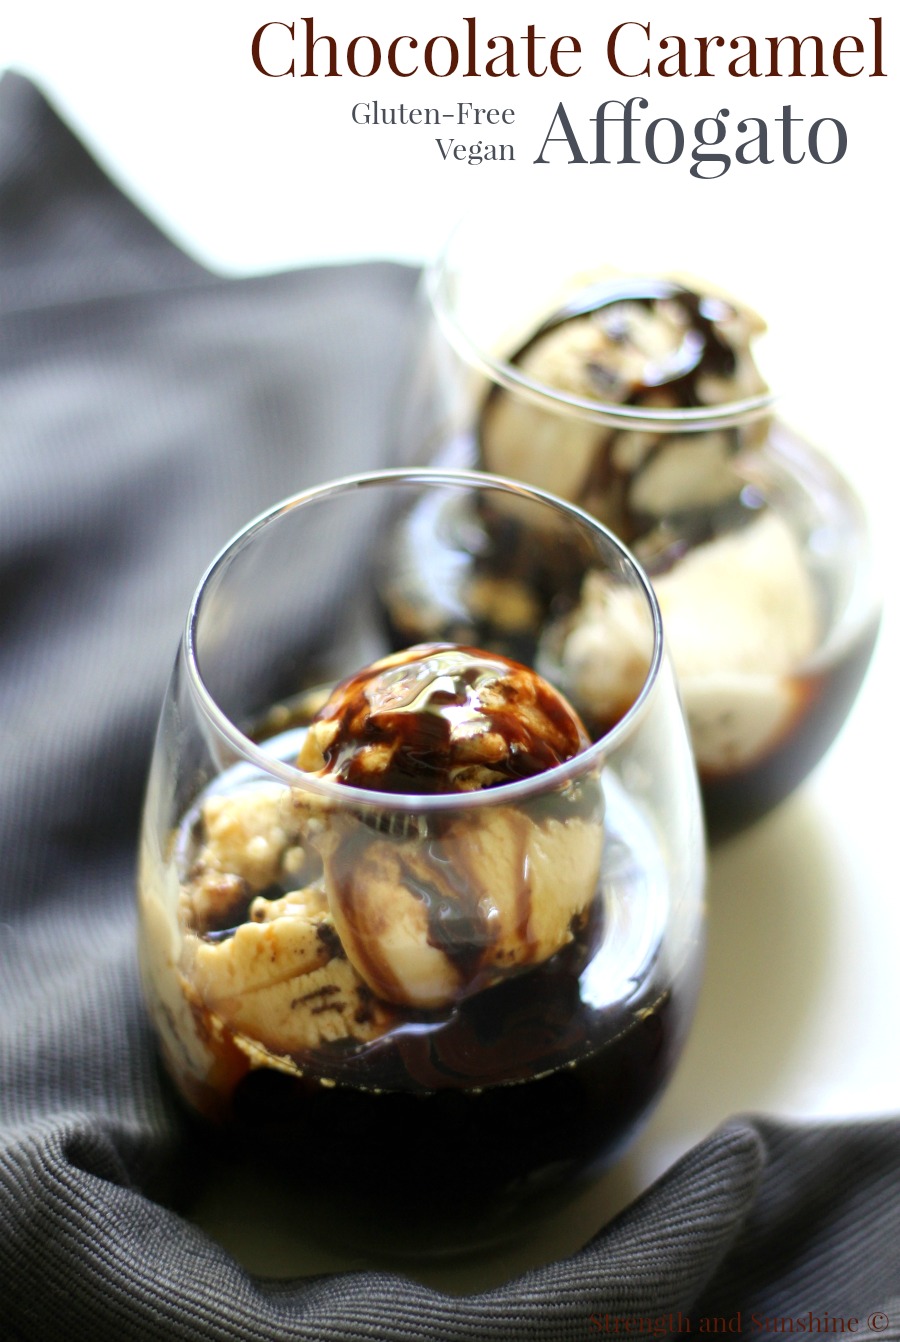 Chocolate Caramel Affogato (Gluten-Free, Vegan) | Strength and Sunshine @RebeccaGF666 The easiest 2 ingredient Chocolate Caramel Affogato recipe that's gluten-free and vegan! A decadent buzz-worthy treat to prepare on a date night or girl's night! This twist on the classic Italian dessert will be your new favorite coffee and ice cream treat!